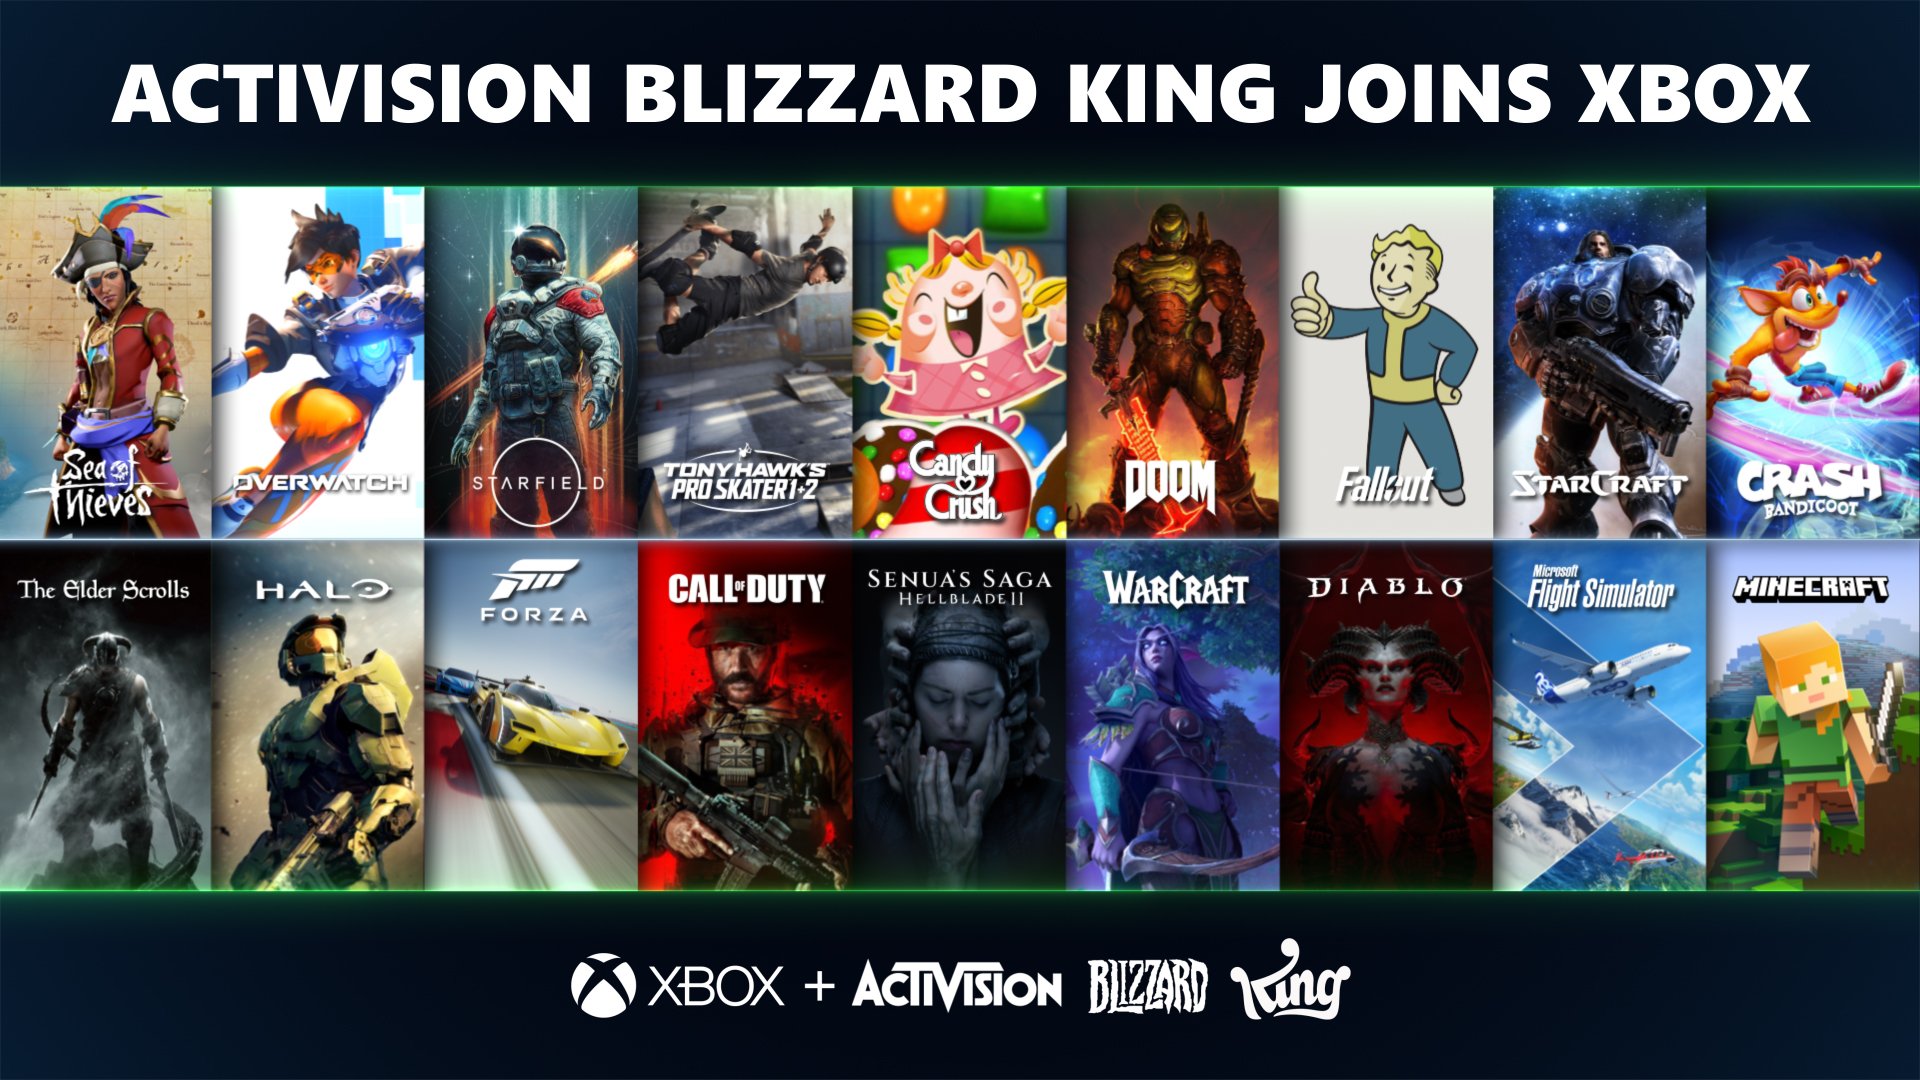 Here's how Activision Blizzard King could fuel Xbox's next-gen ad